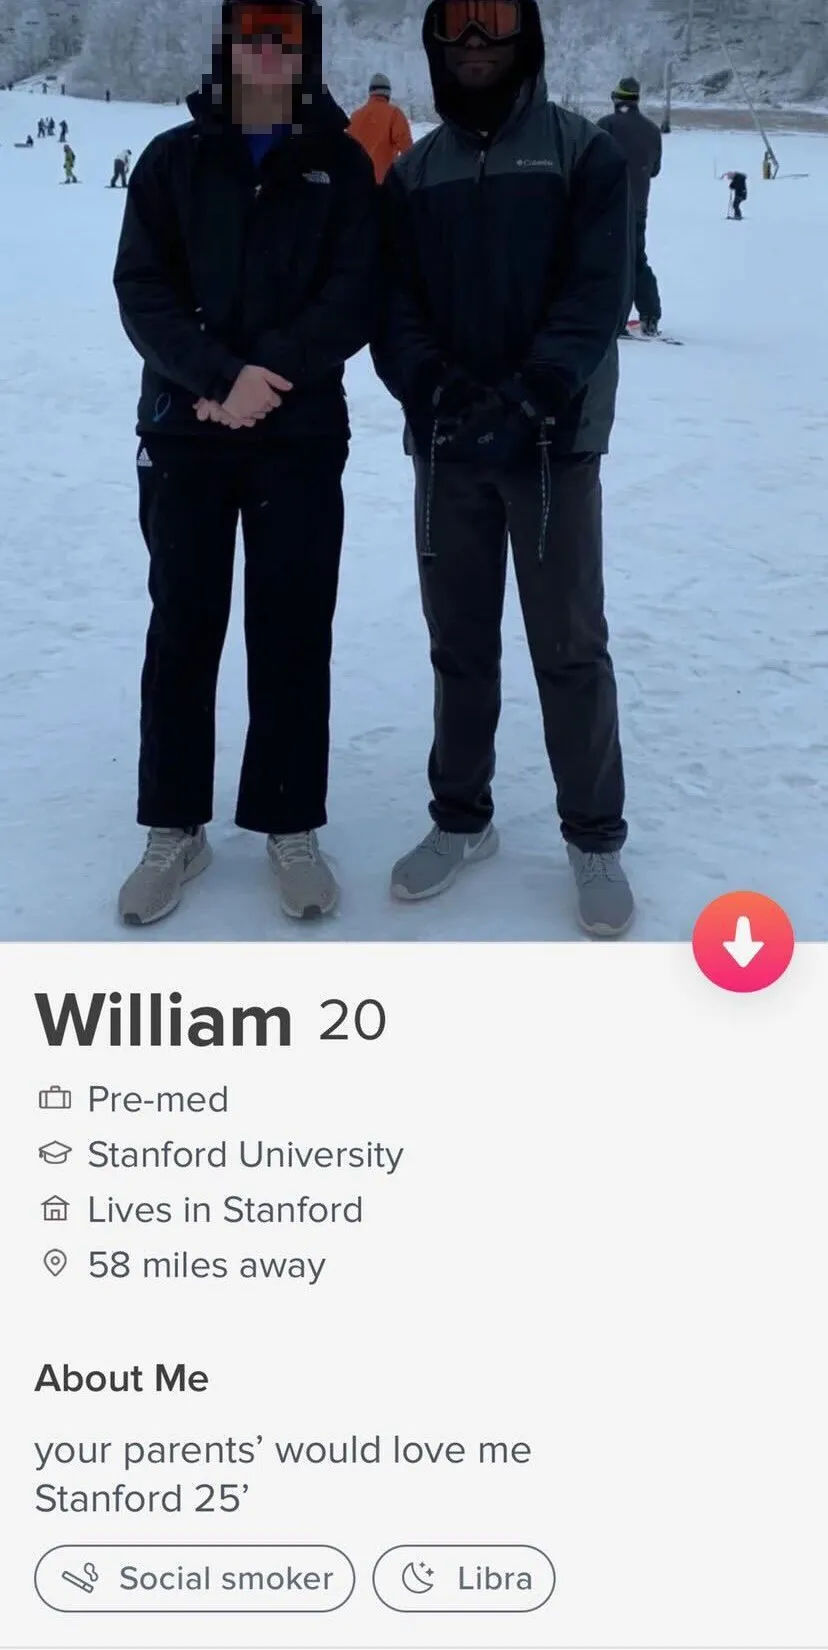 A Tinder profile for "William, 20, pre-med at Stanford." The profile says "your parents would love me." The photo shows Curry standing next to another man, both puffing out their chests and clutching their hands at waist level. The background is snowy and the two are wearing ski goggles.